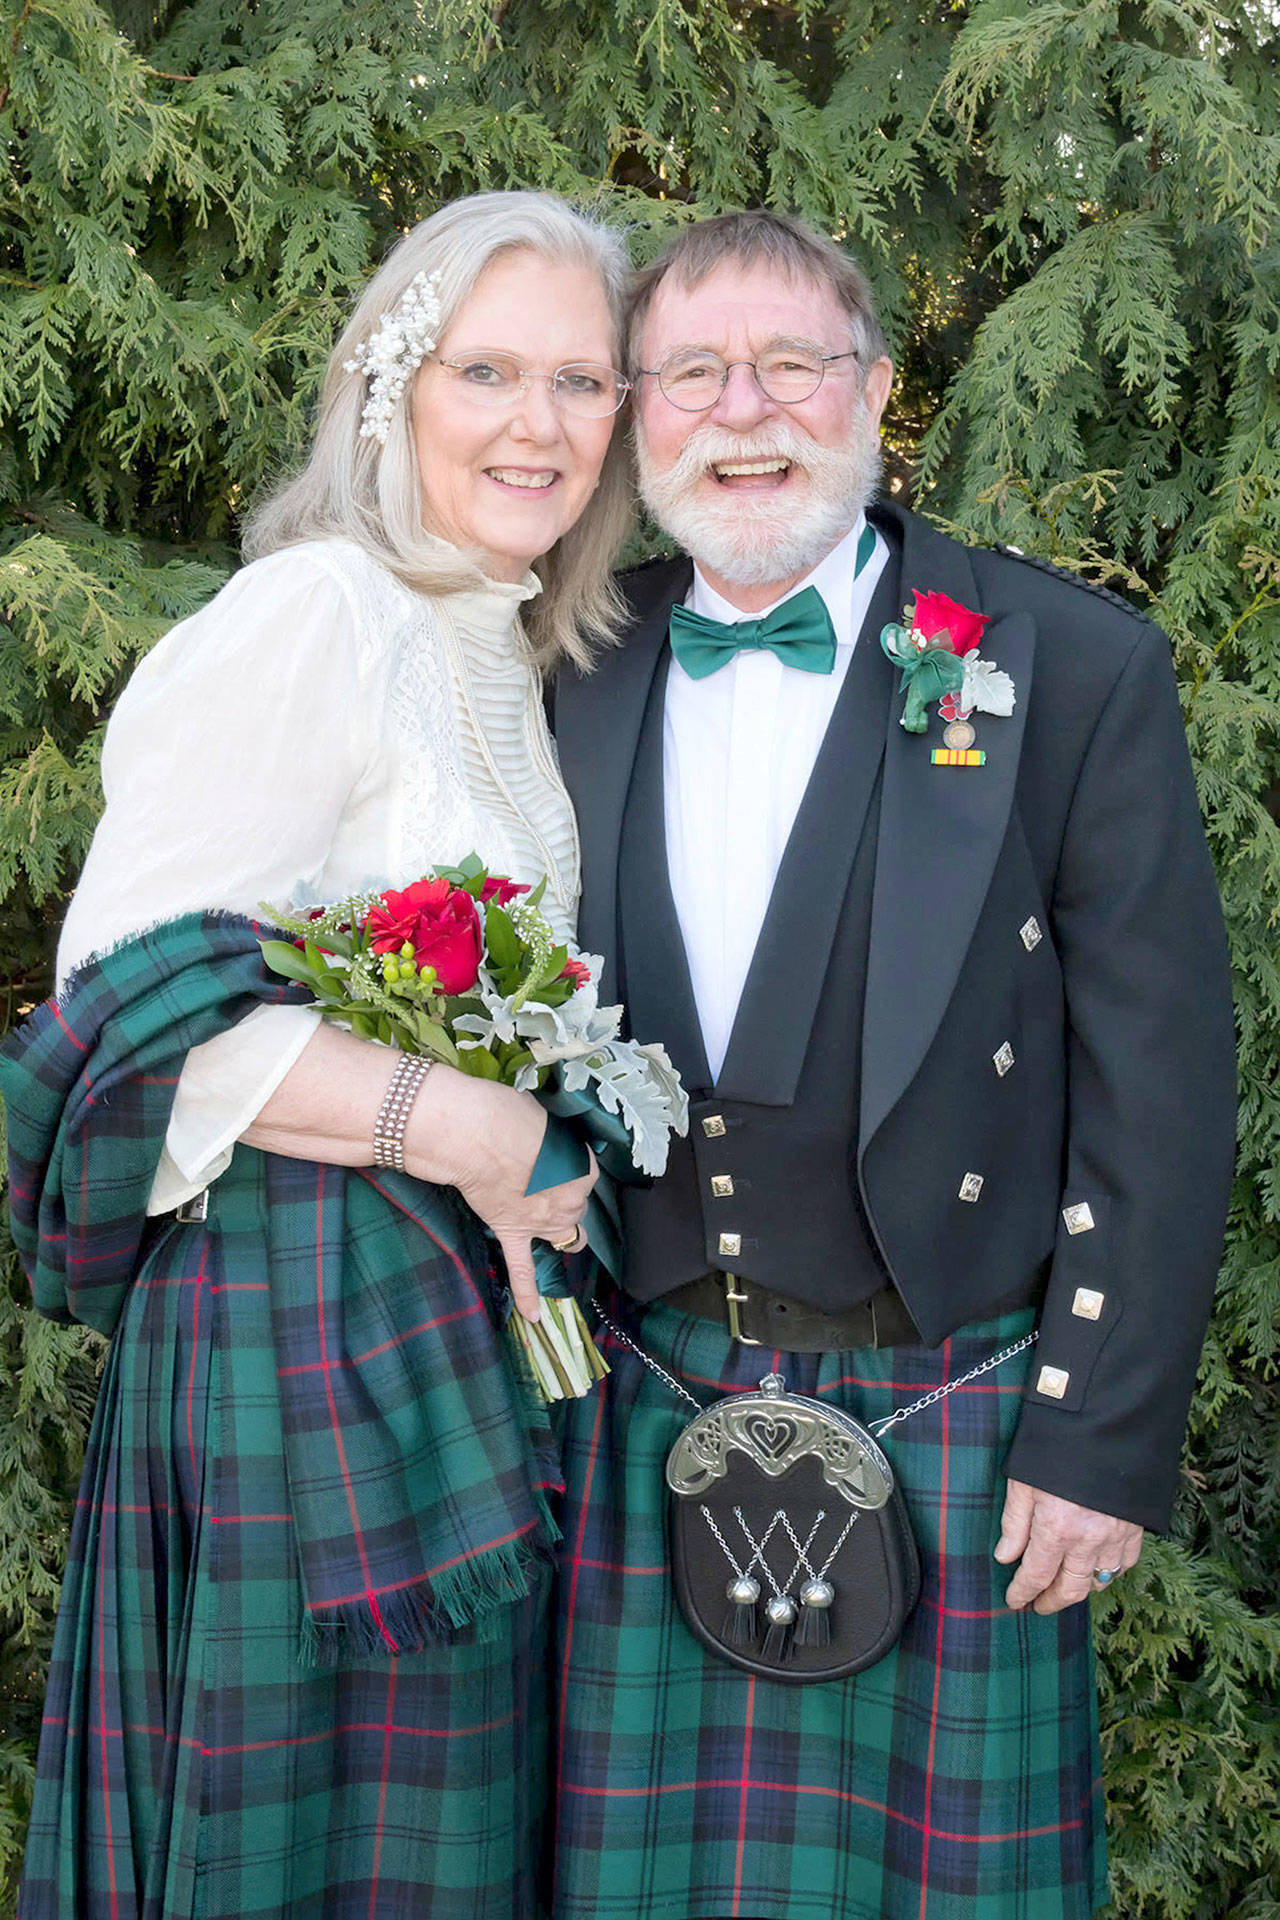 Cathy Haight and Michael Eakle of Port Angeles chose Scottish attire for their March wedding. (Submitted photo)